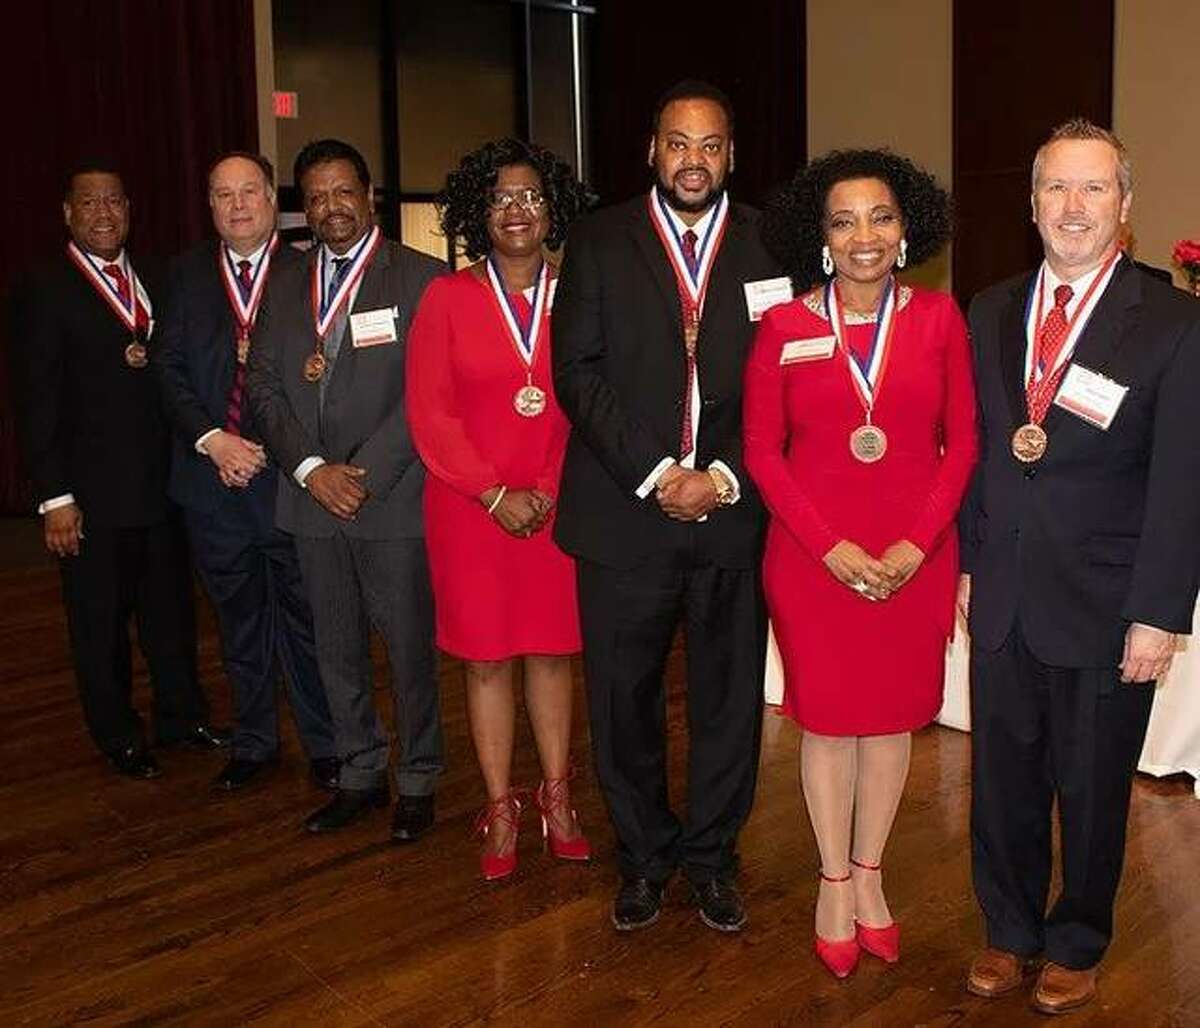 Some of the honorees from the Metro Area Professional Organization’s Honors Dinner Celebration in 2019.